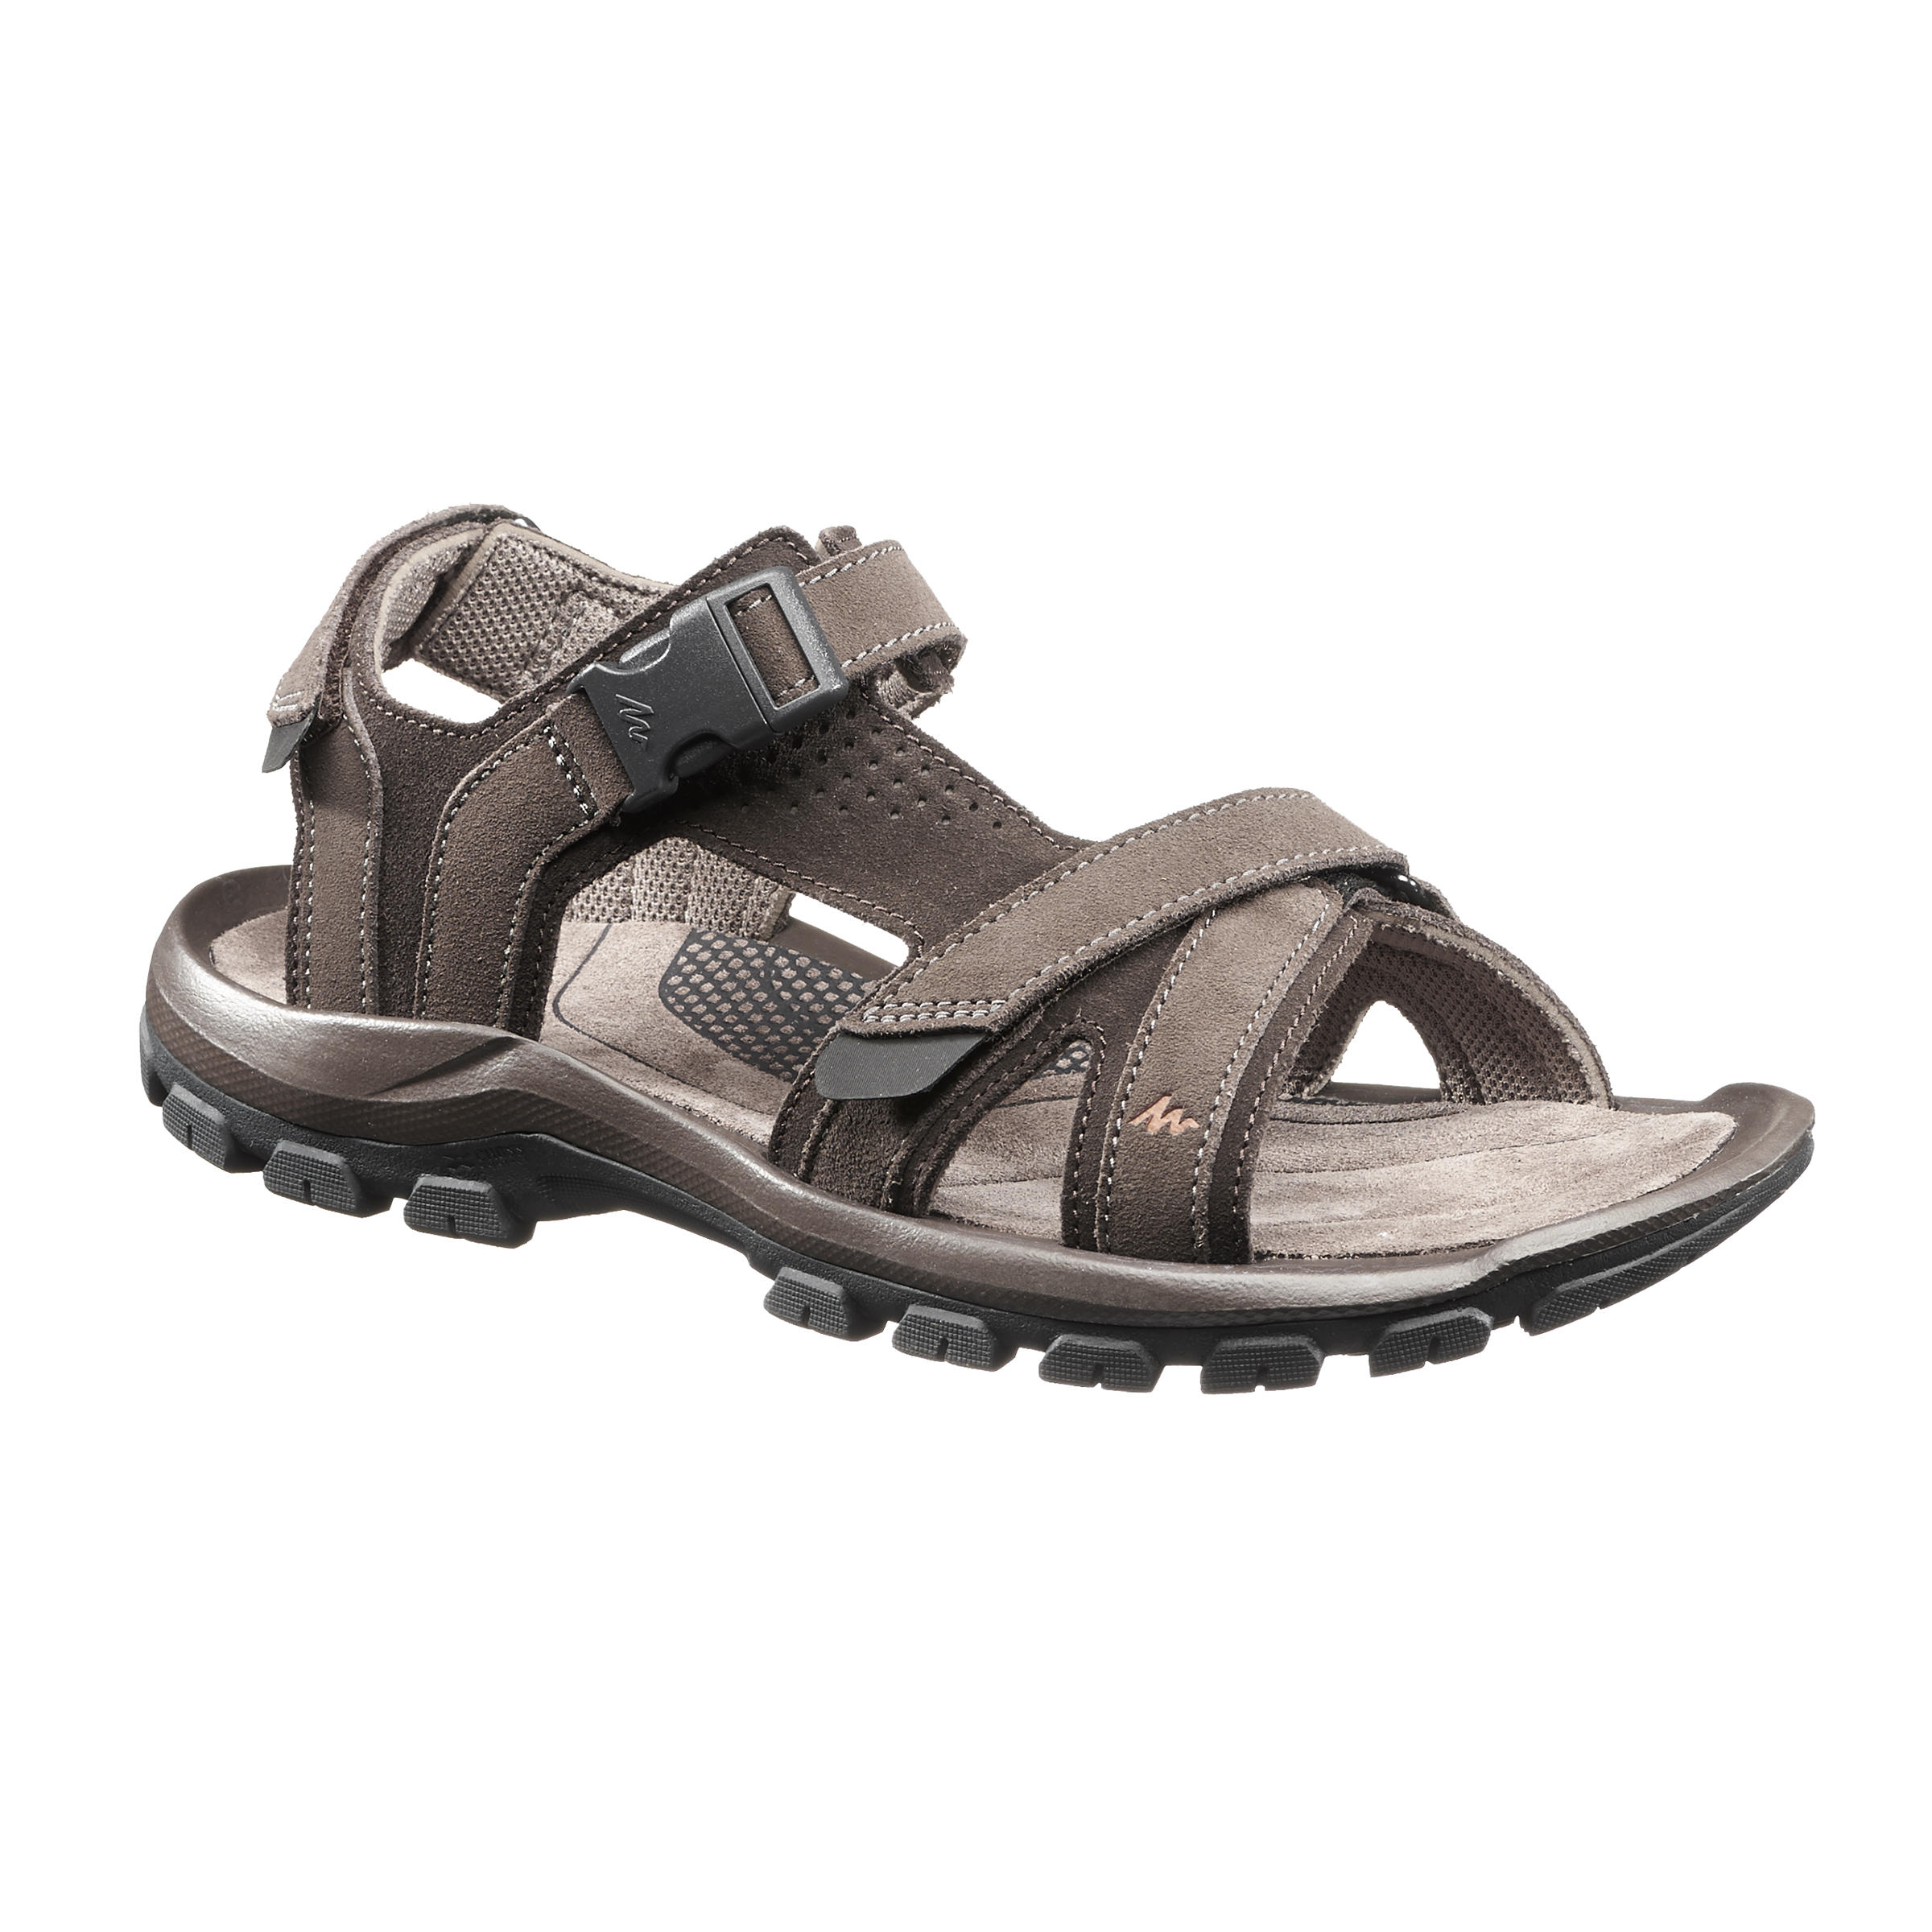 Buy Sandals From Recycled Tires, Women's Sandals, Men's Sandals Online in  India - Etsy